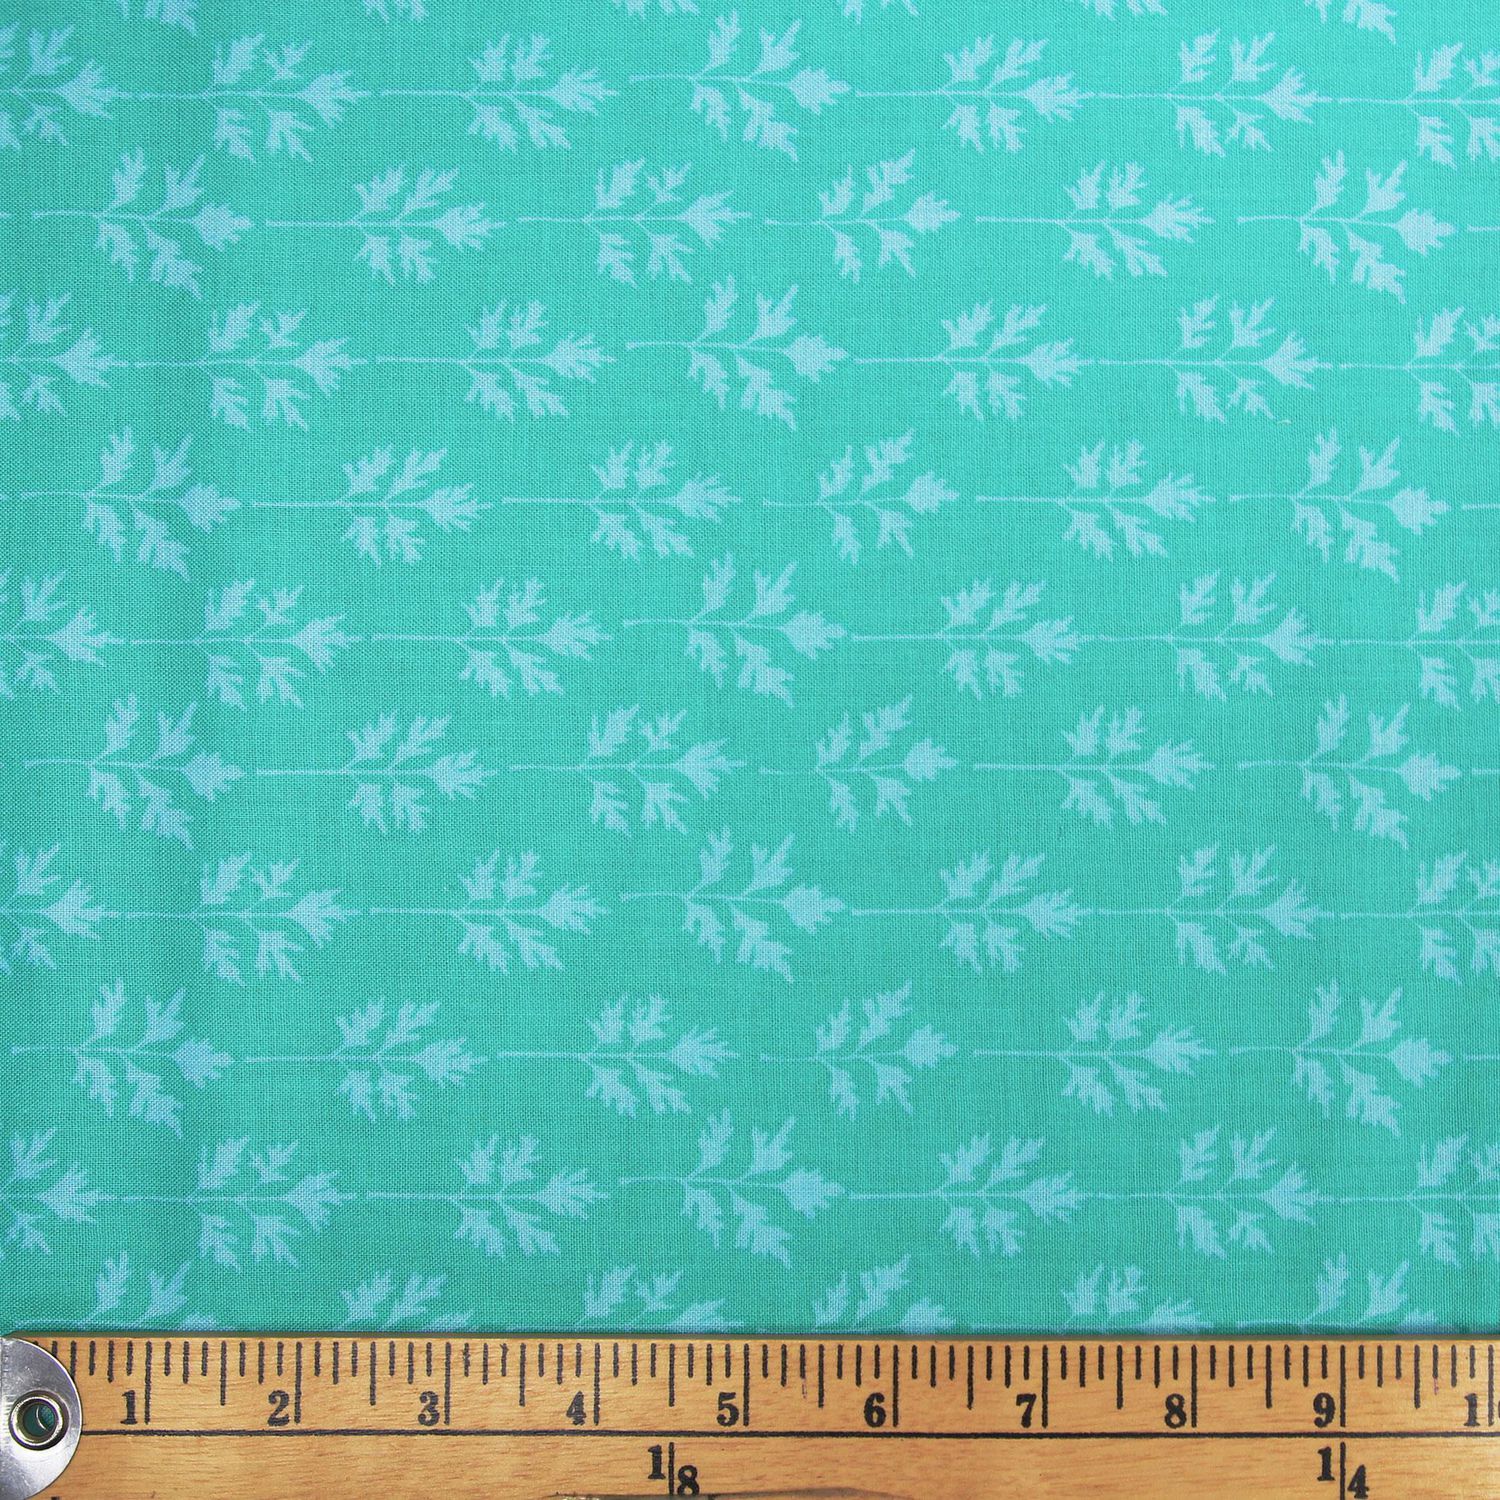 Fabric Creations Turquoise Leaves Cotton Fabric by the Metre | Walmart ...